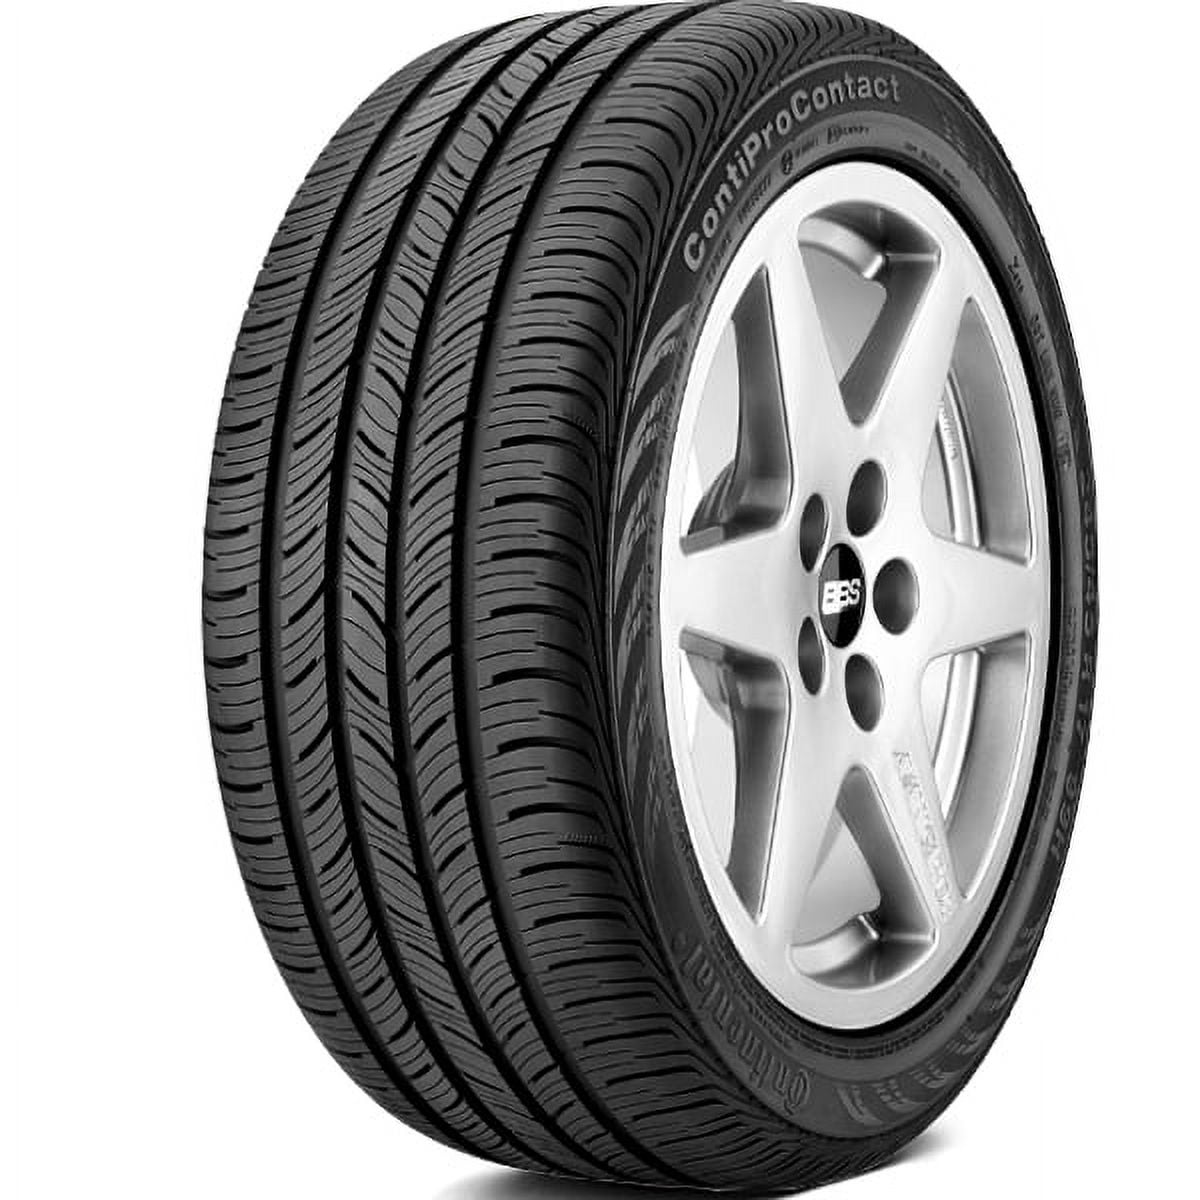 89V 205/50R17 Tire Season ContiProContact All Continental BSW